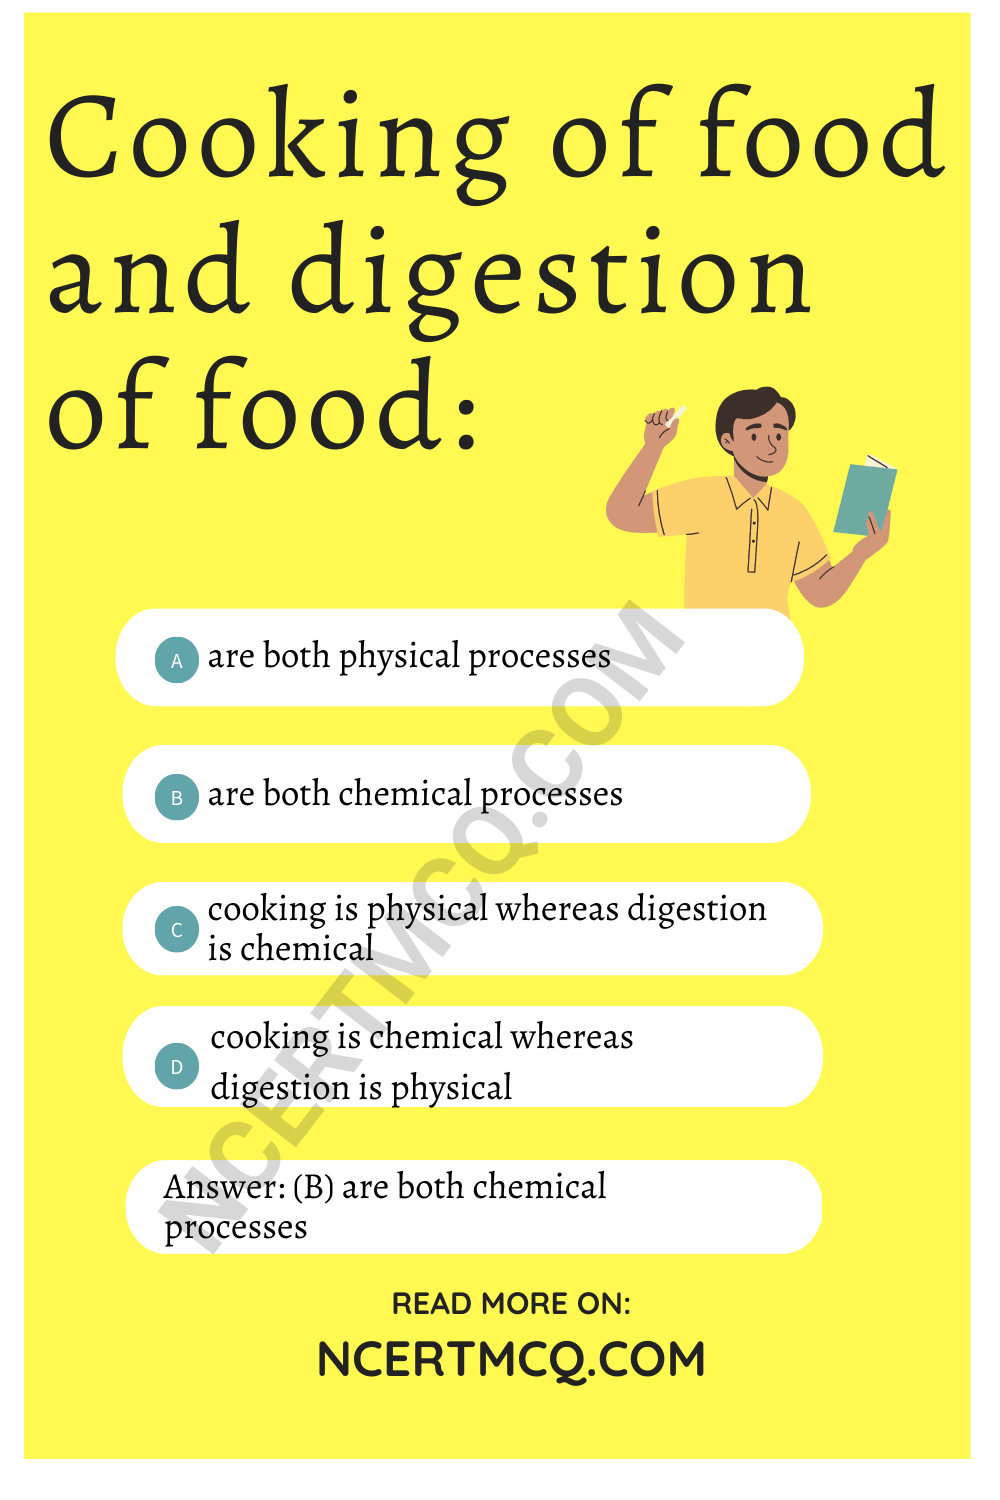 Cooking of food and digestion of food: